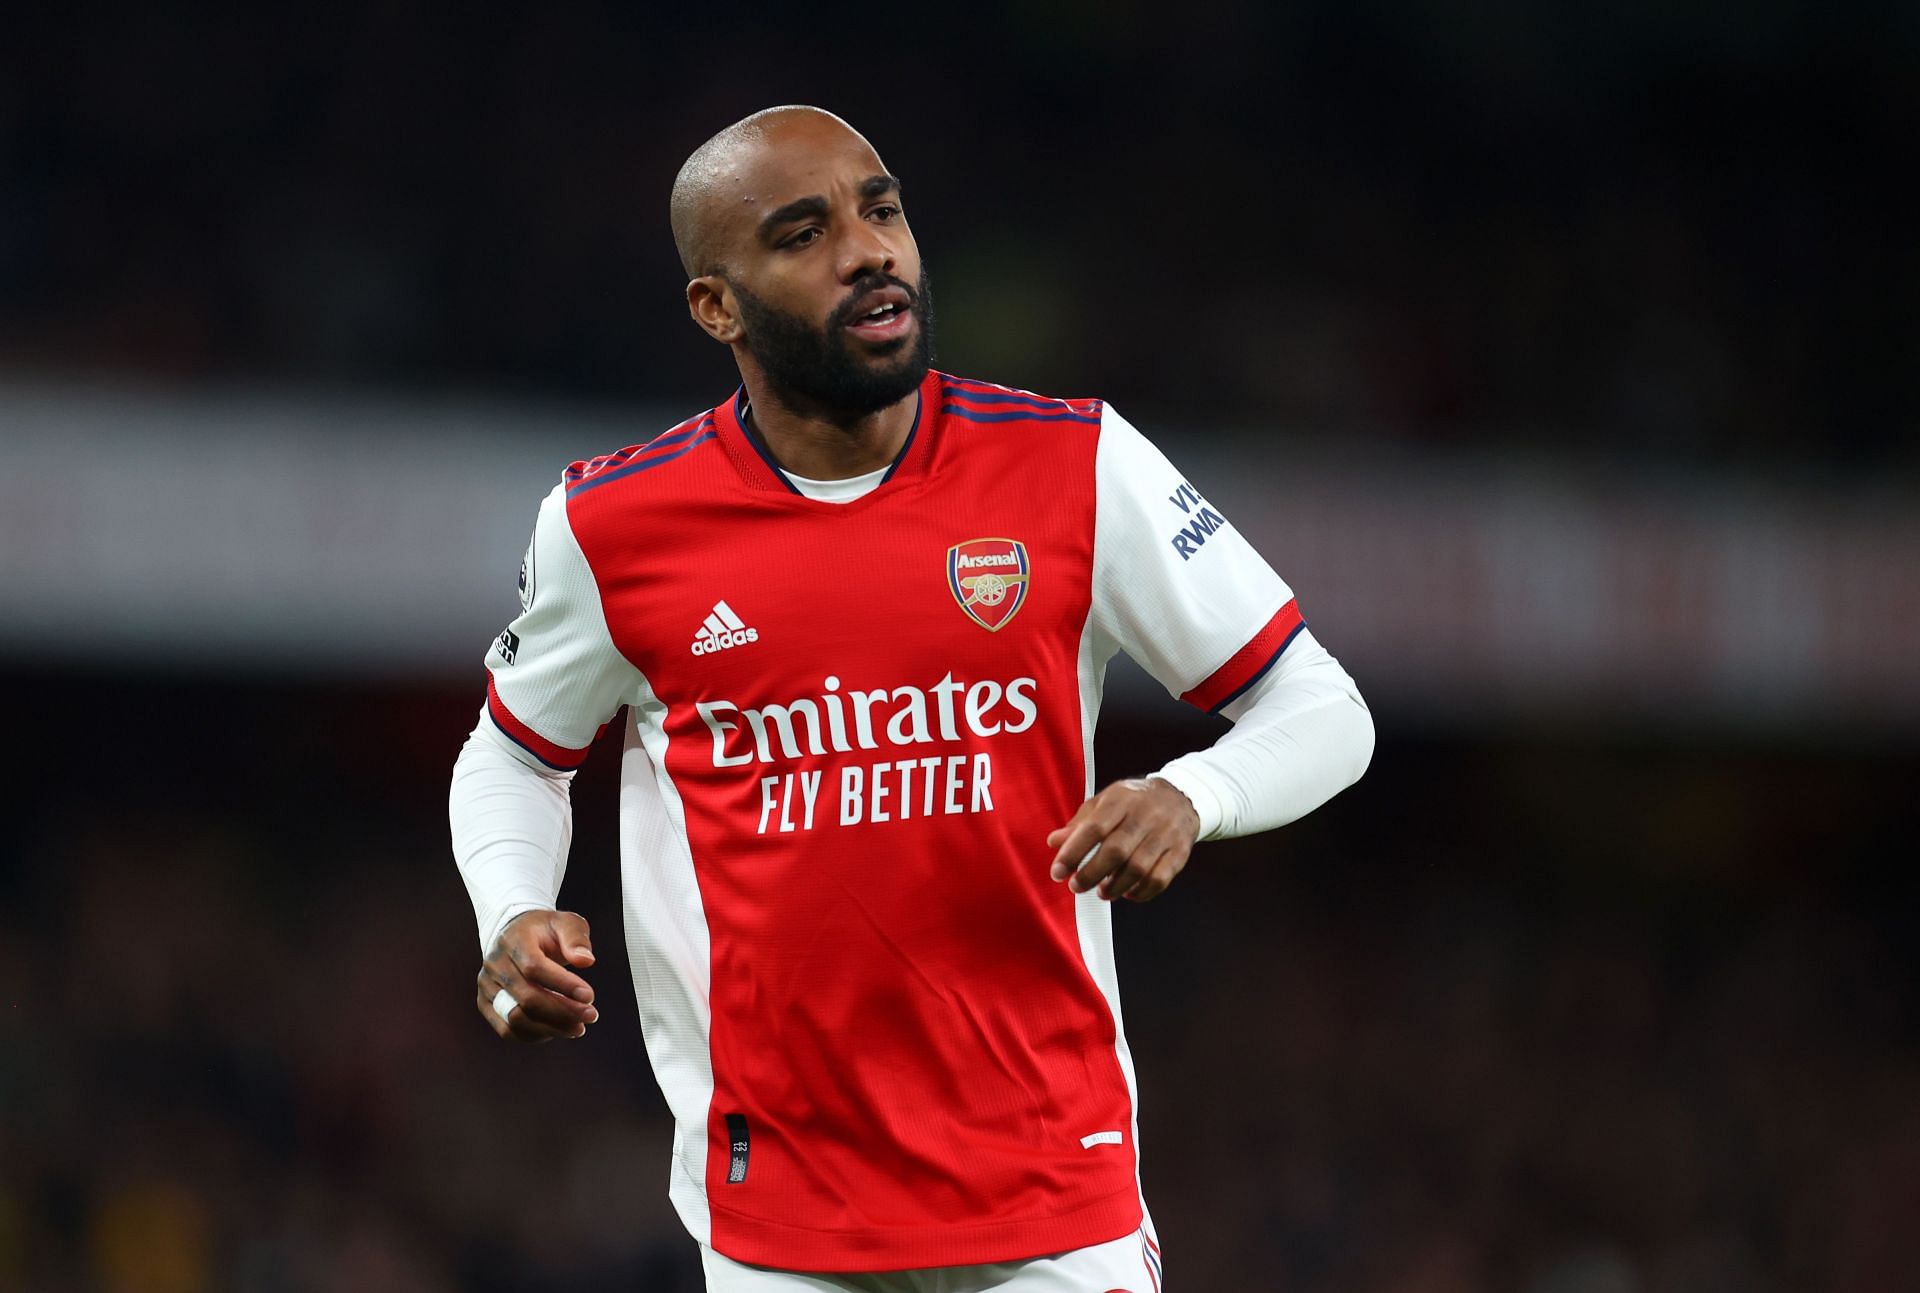 Gabriel Agbonlahor has advised Arsenal to offload Alexandre Lacazette